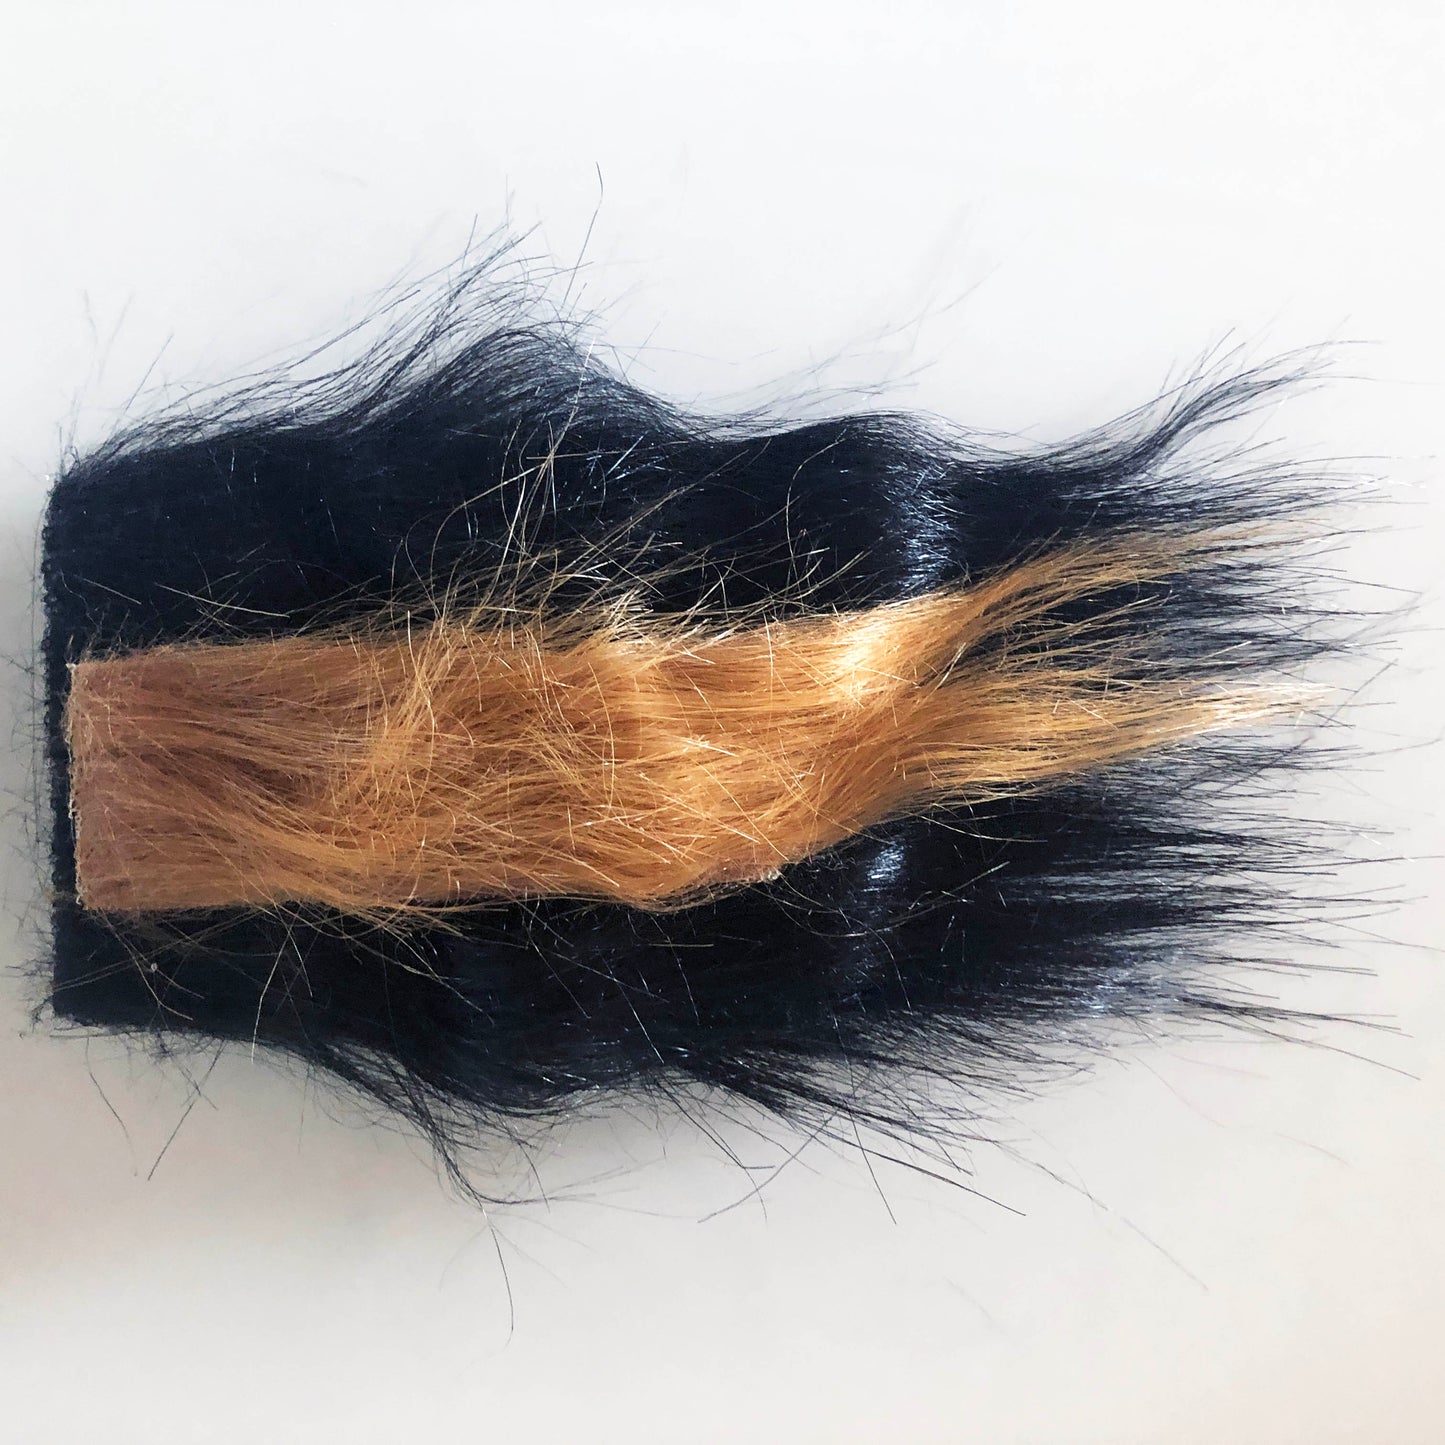 A small square of black fur with a separate piece of brown down the middle